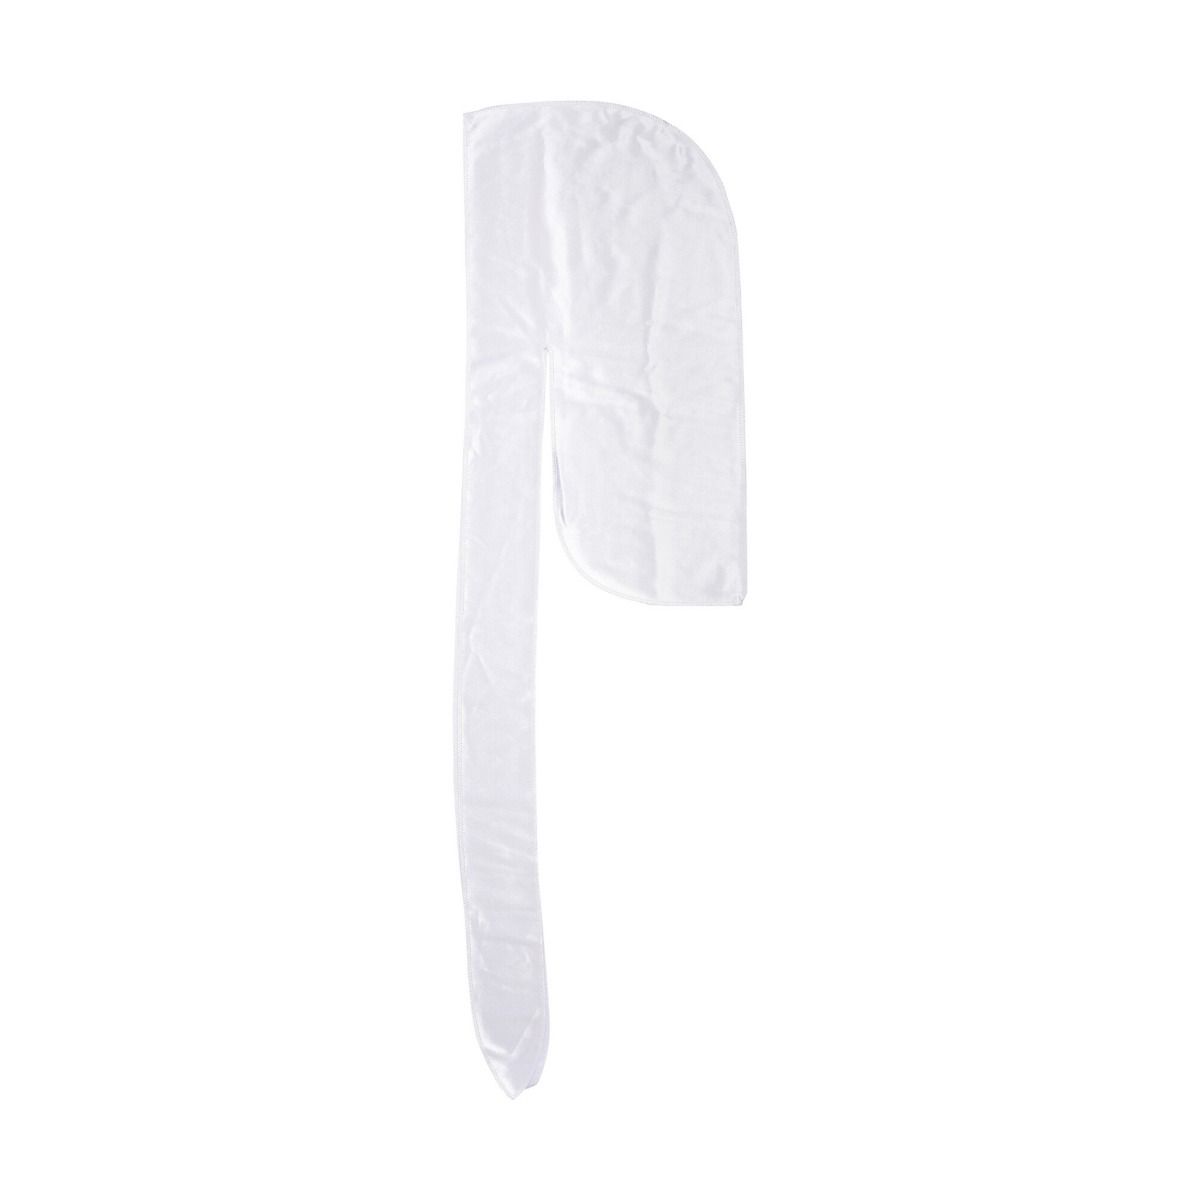 RED POWER WAVE EXTREME SILKY DURAG - WHITE